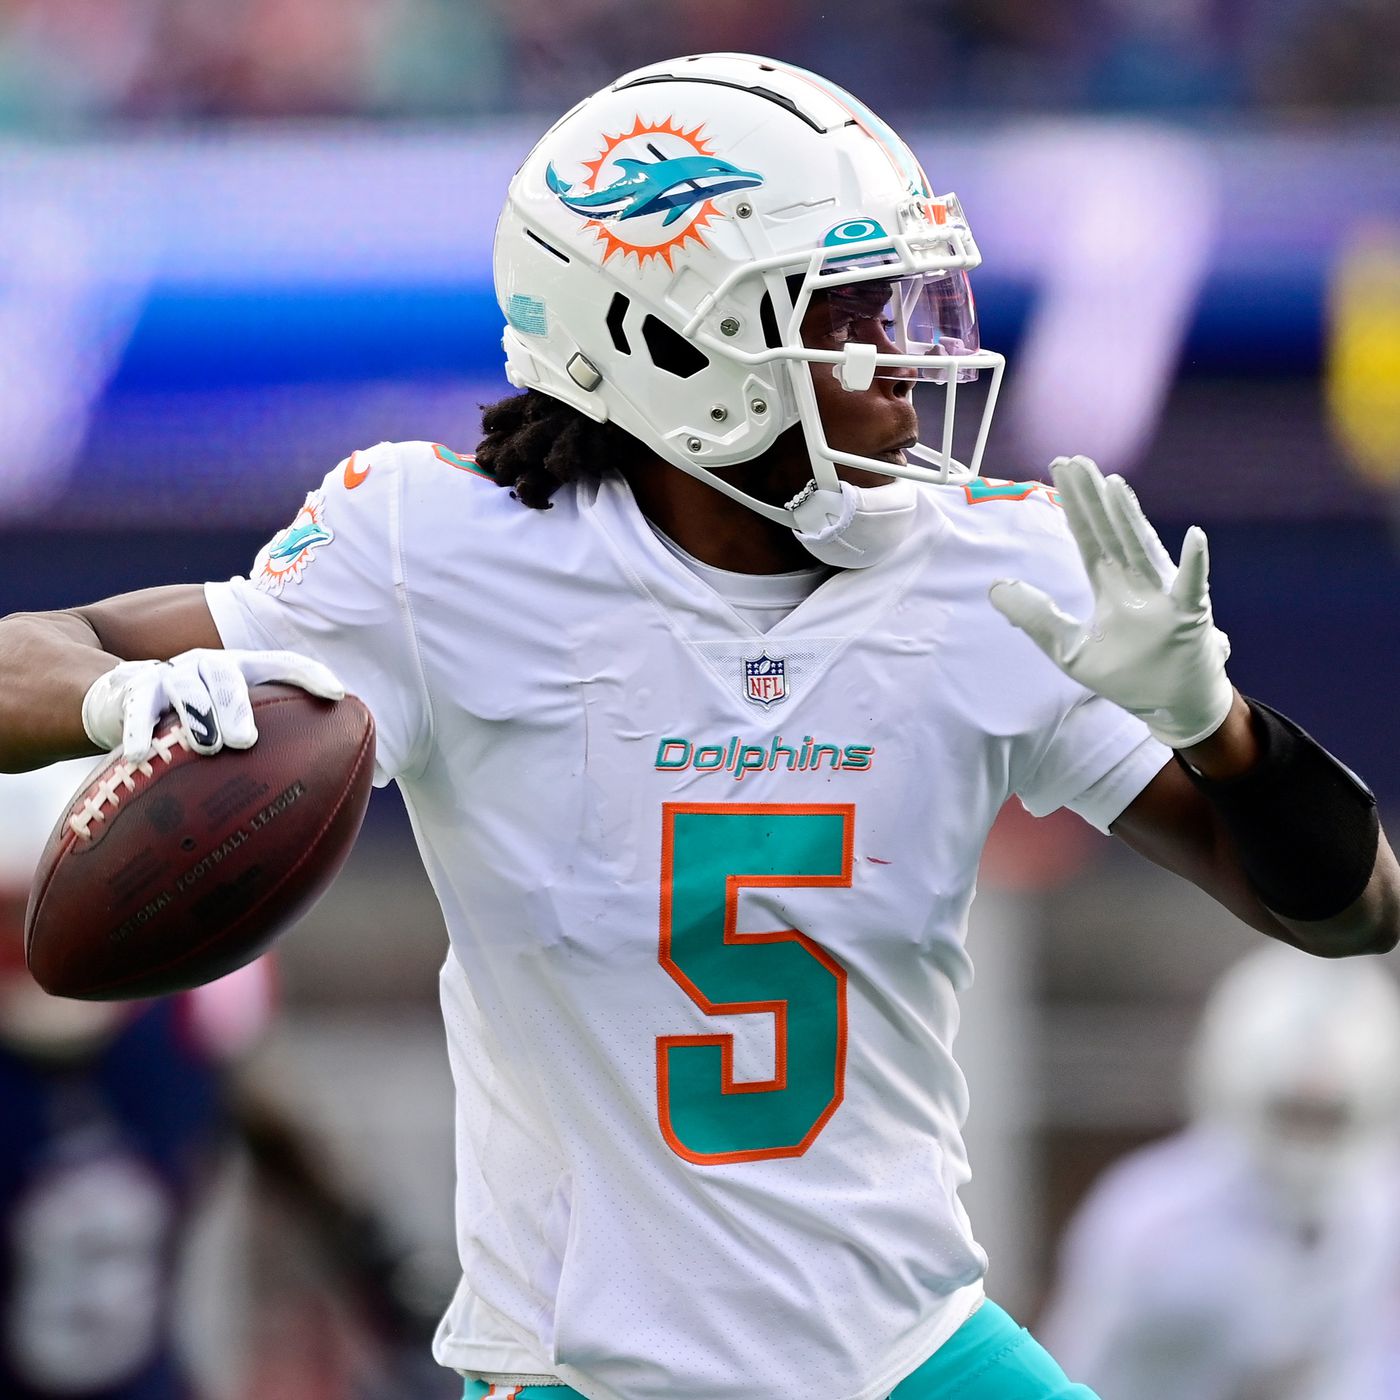 Teddy Bridgewater injury update: Dolphins quarterback sustained broken  finger according to report - The Phinsider